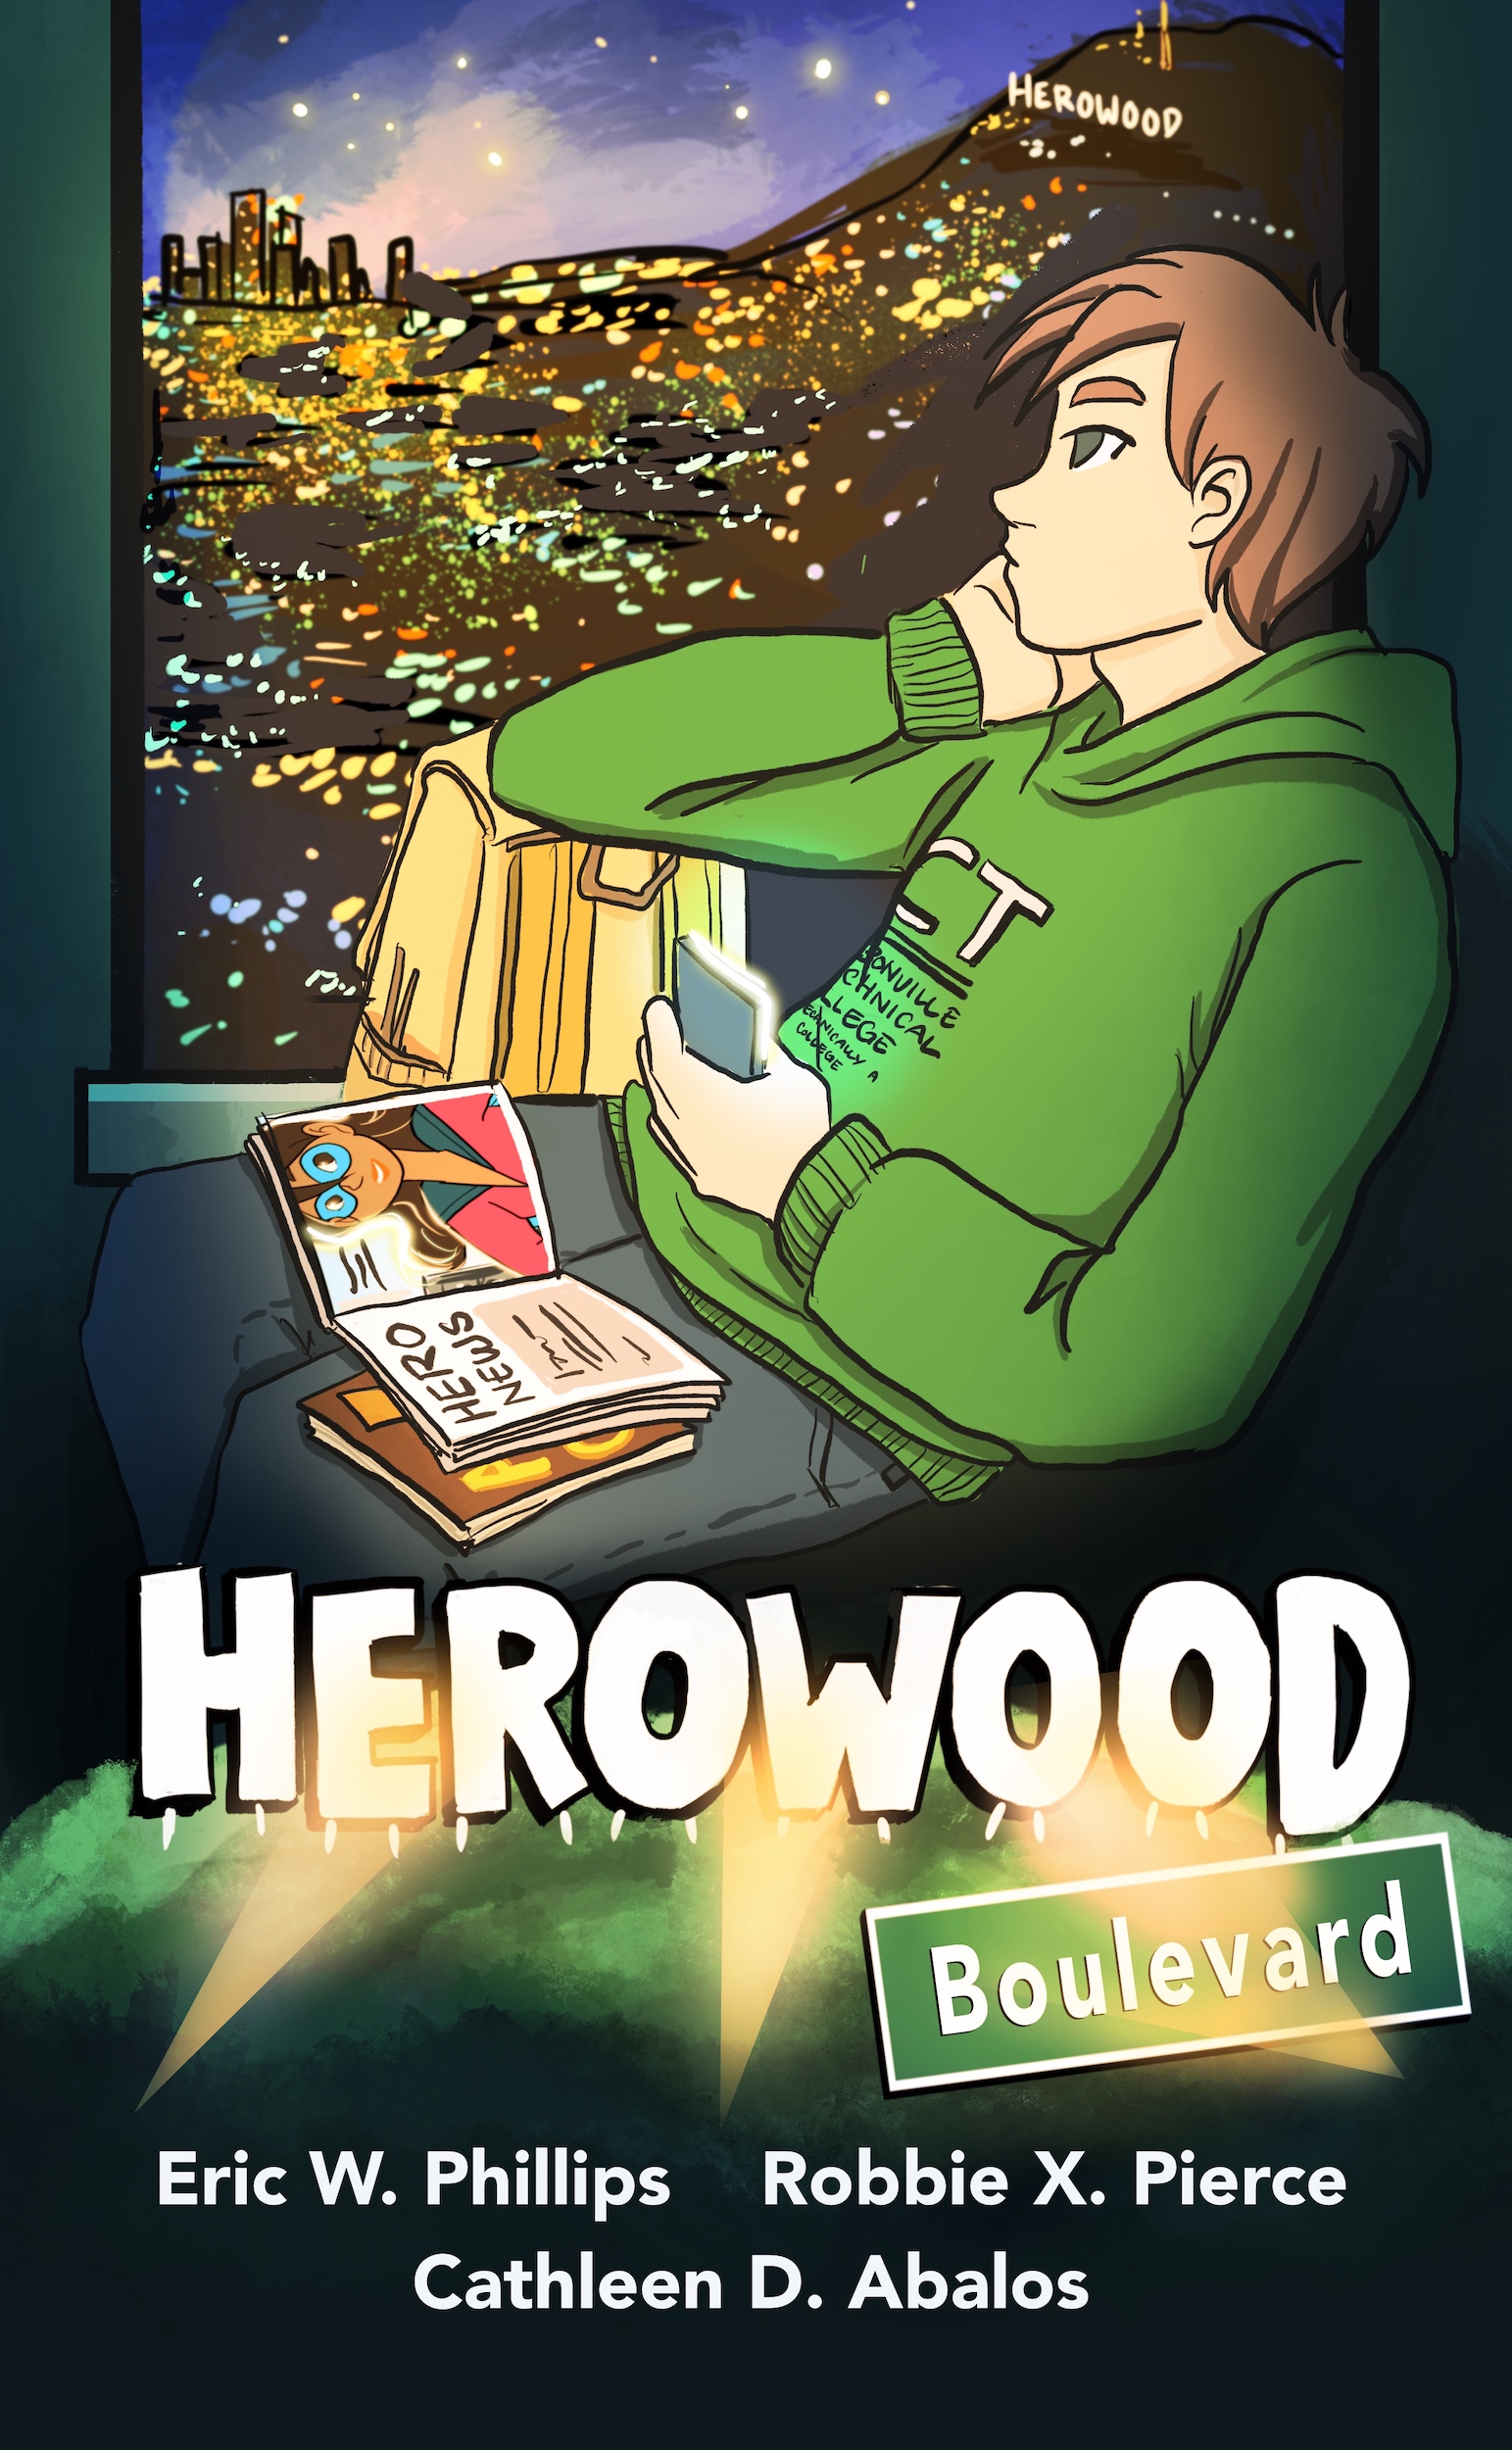 Ch 0: Welcome to Herowood